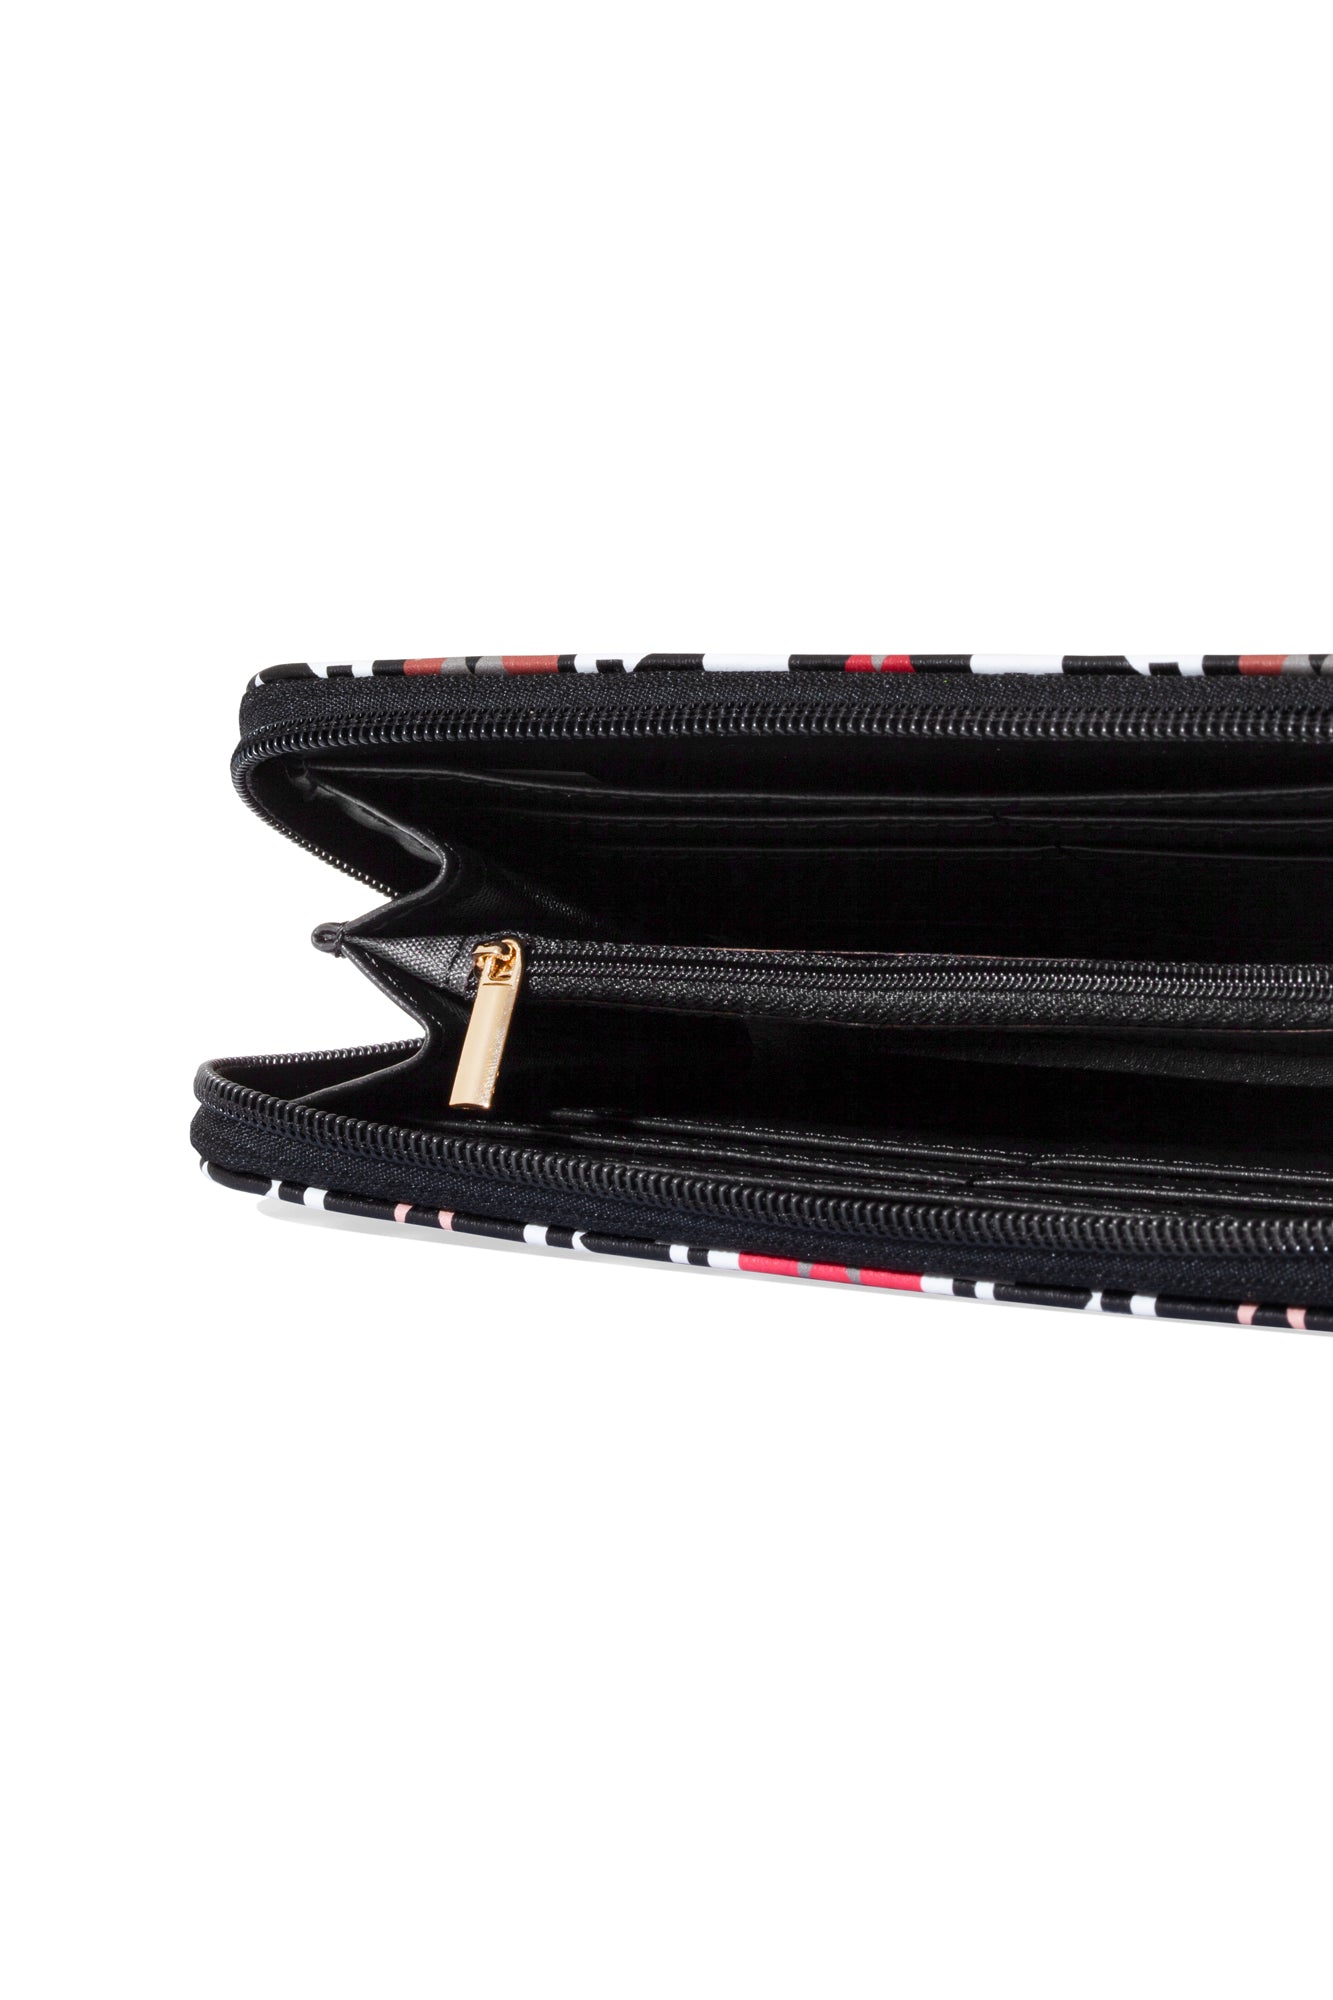 Black interior of southwest style wallet with multiple compartments